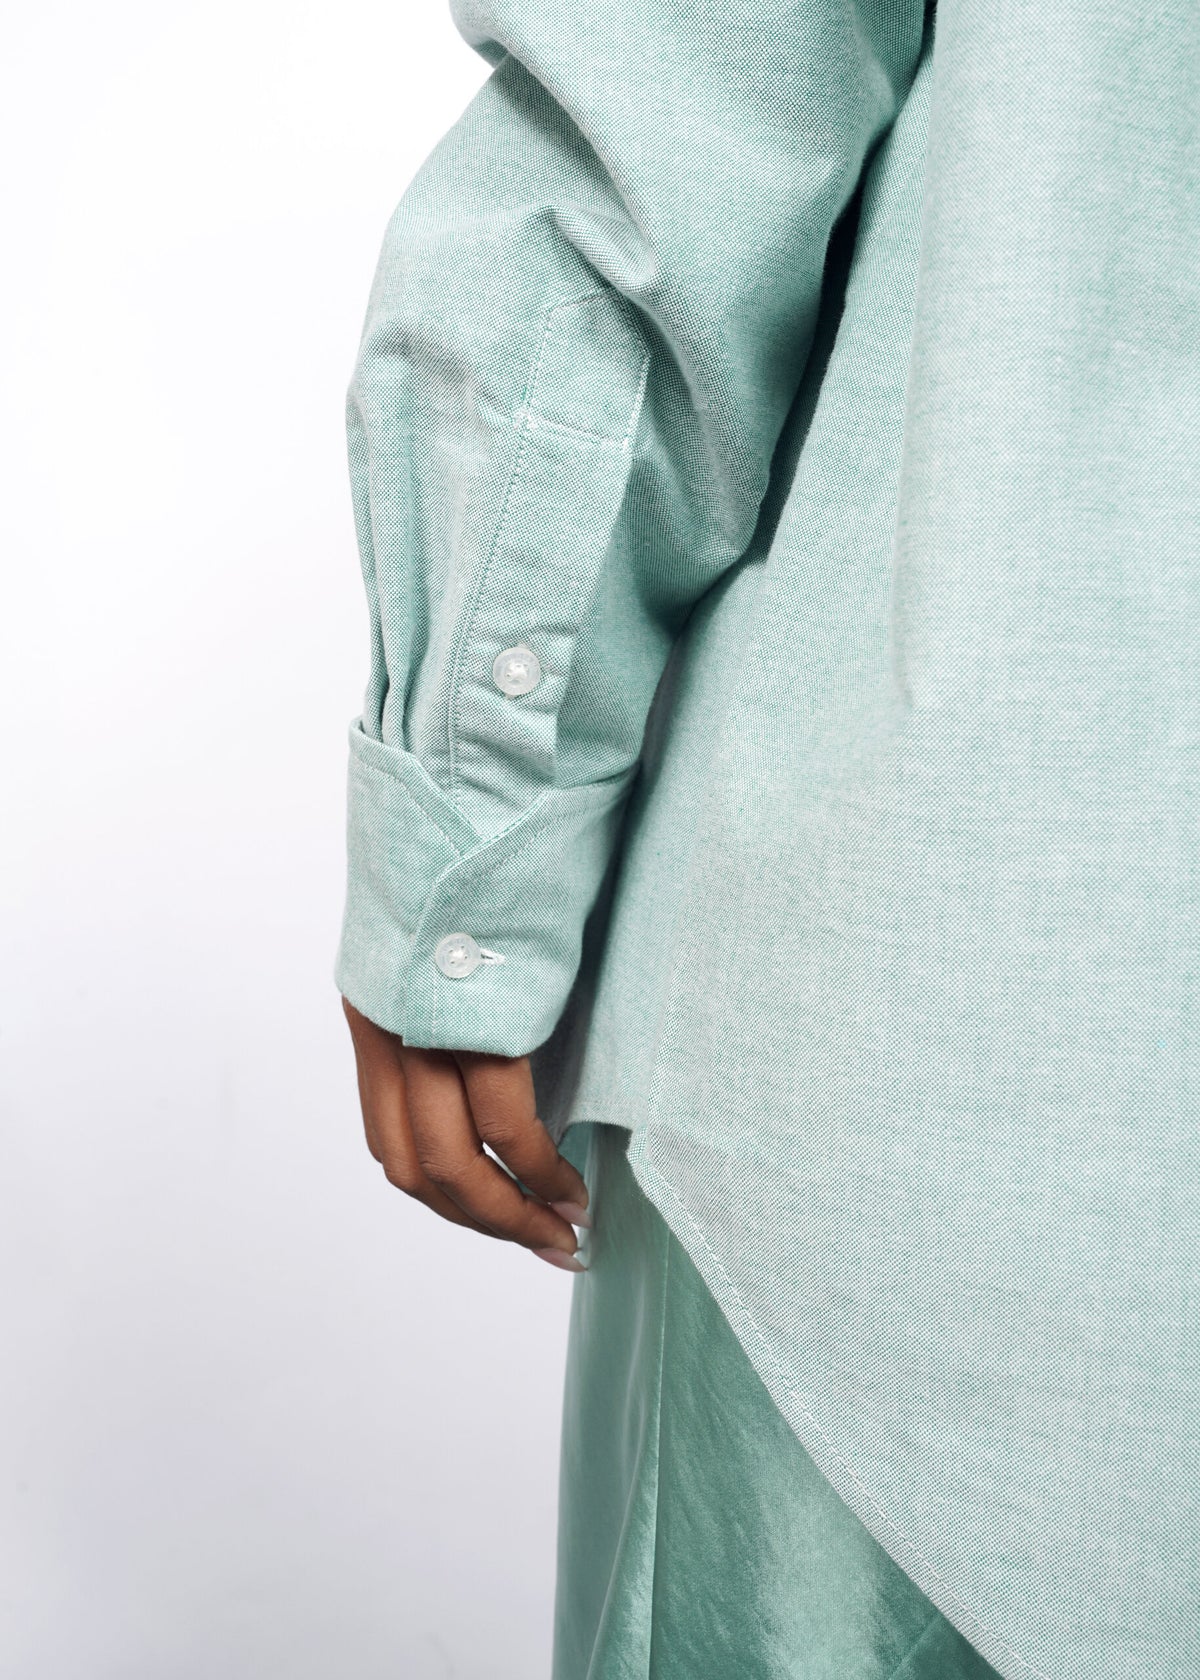 Model wearing The Essential Long Sleeve Oversized Convertible Oxford Button Up in Emerald/White